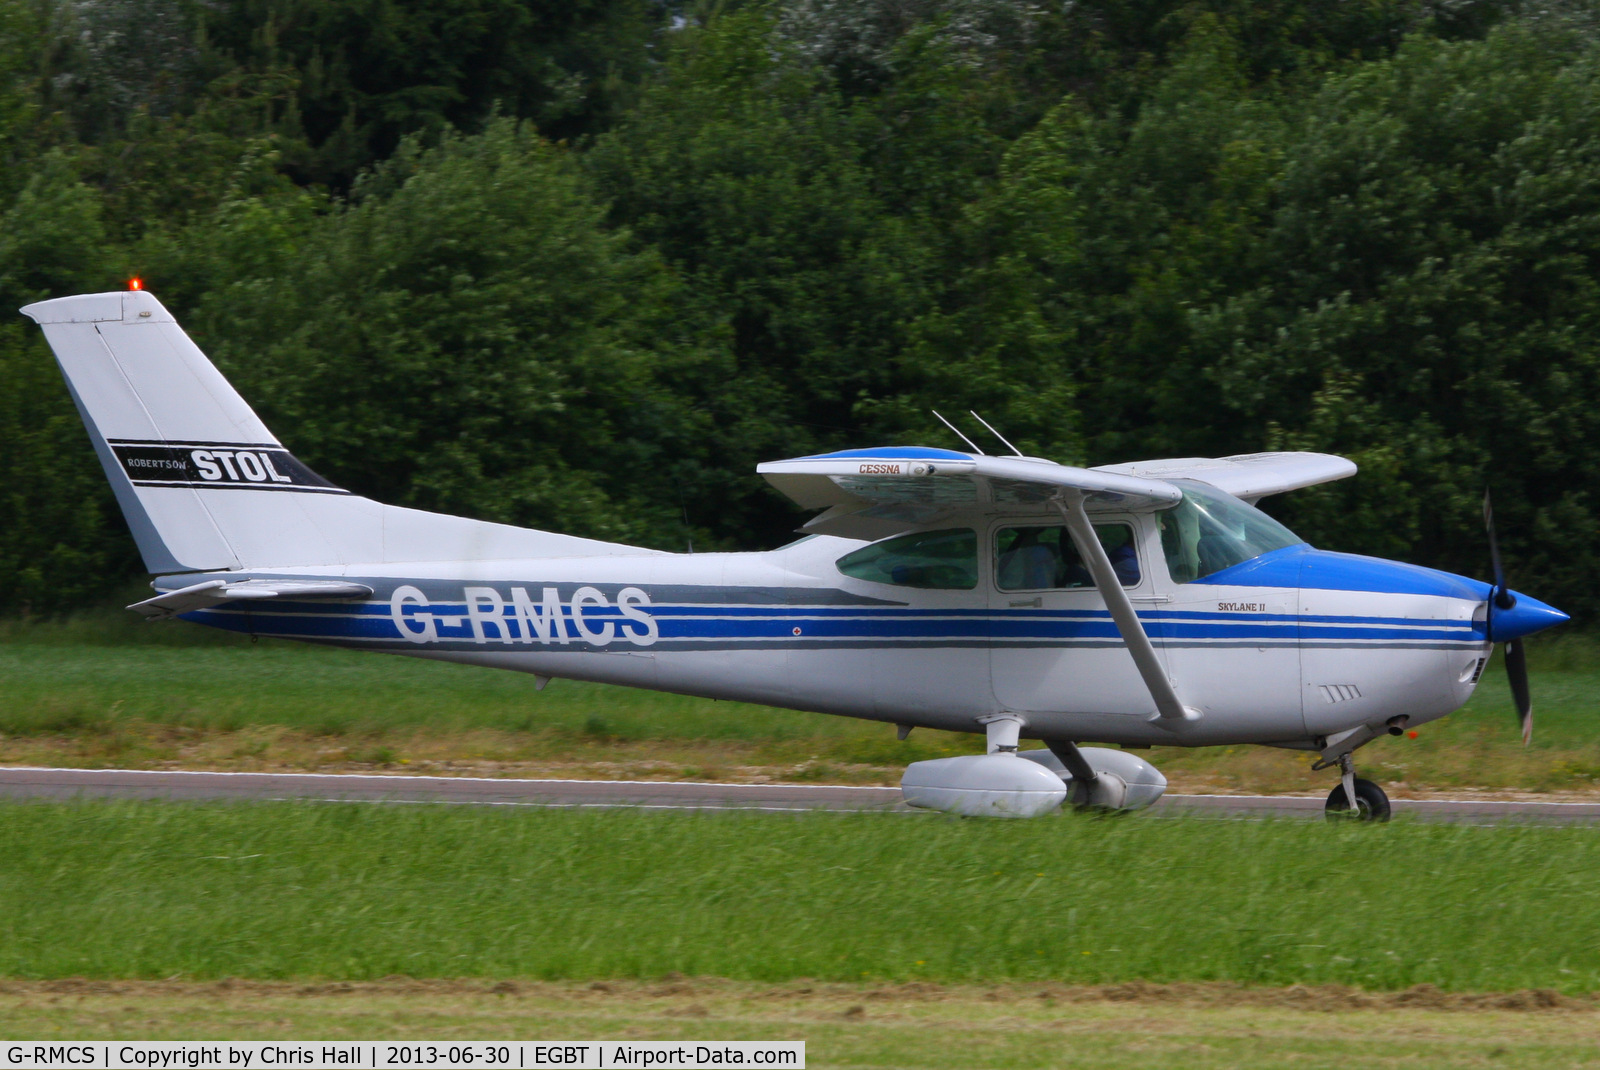 G-RMCS, 1982 Cessna 182R Skylane C/N 18268278, Visitor at Turweston for the British F1 Grand Prix at Silverstone